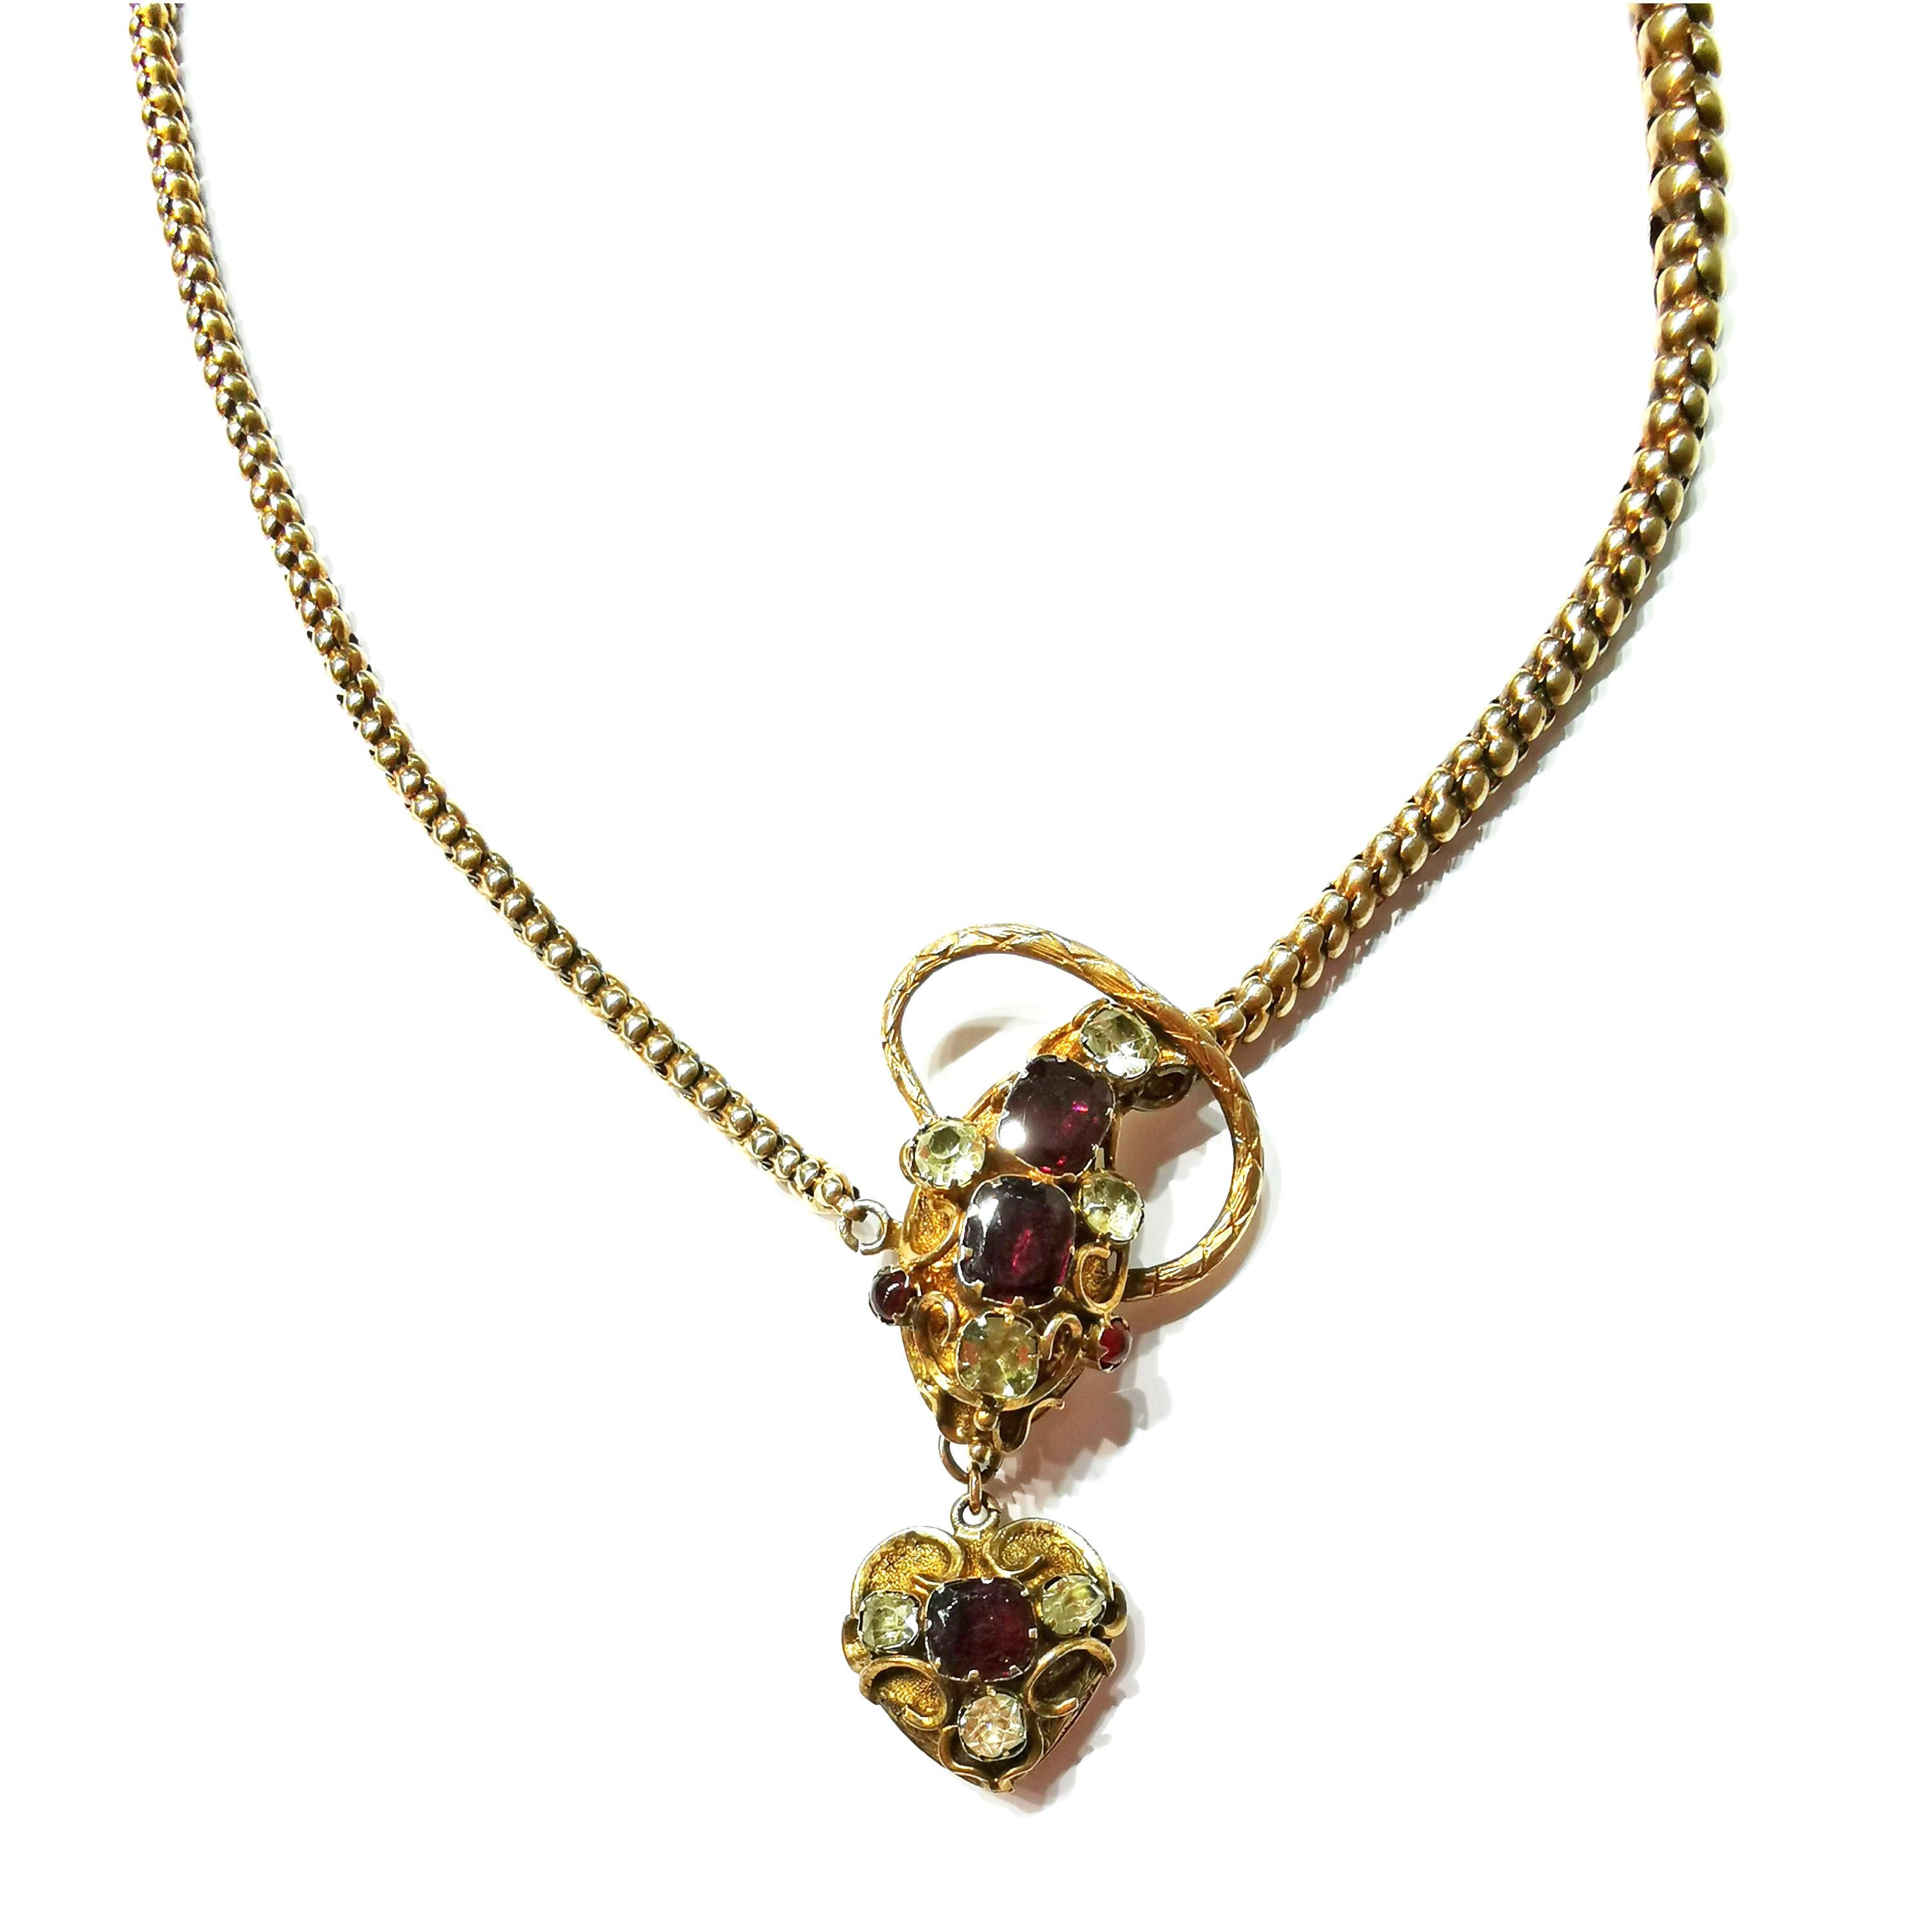 Early Victorian Antique Garnet, Beryl and Gold Snake Necklace, Circa 1840 For Sale